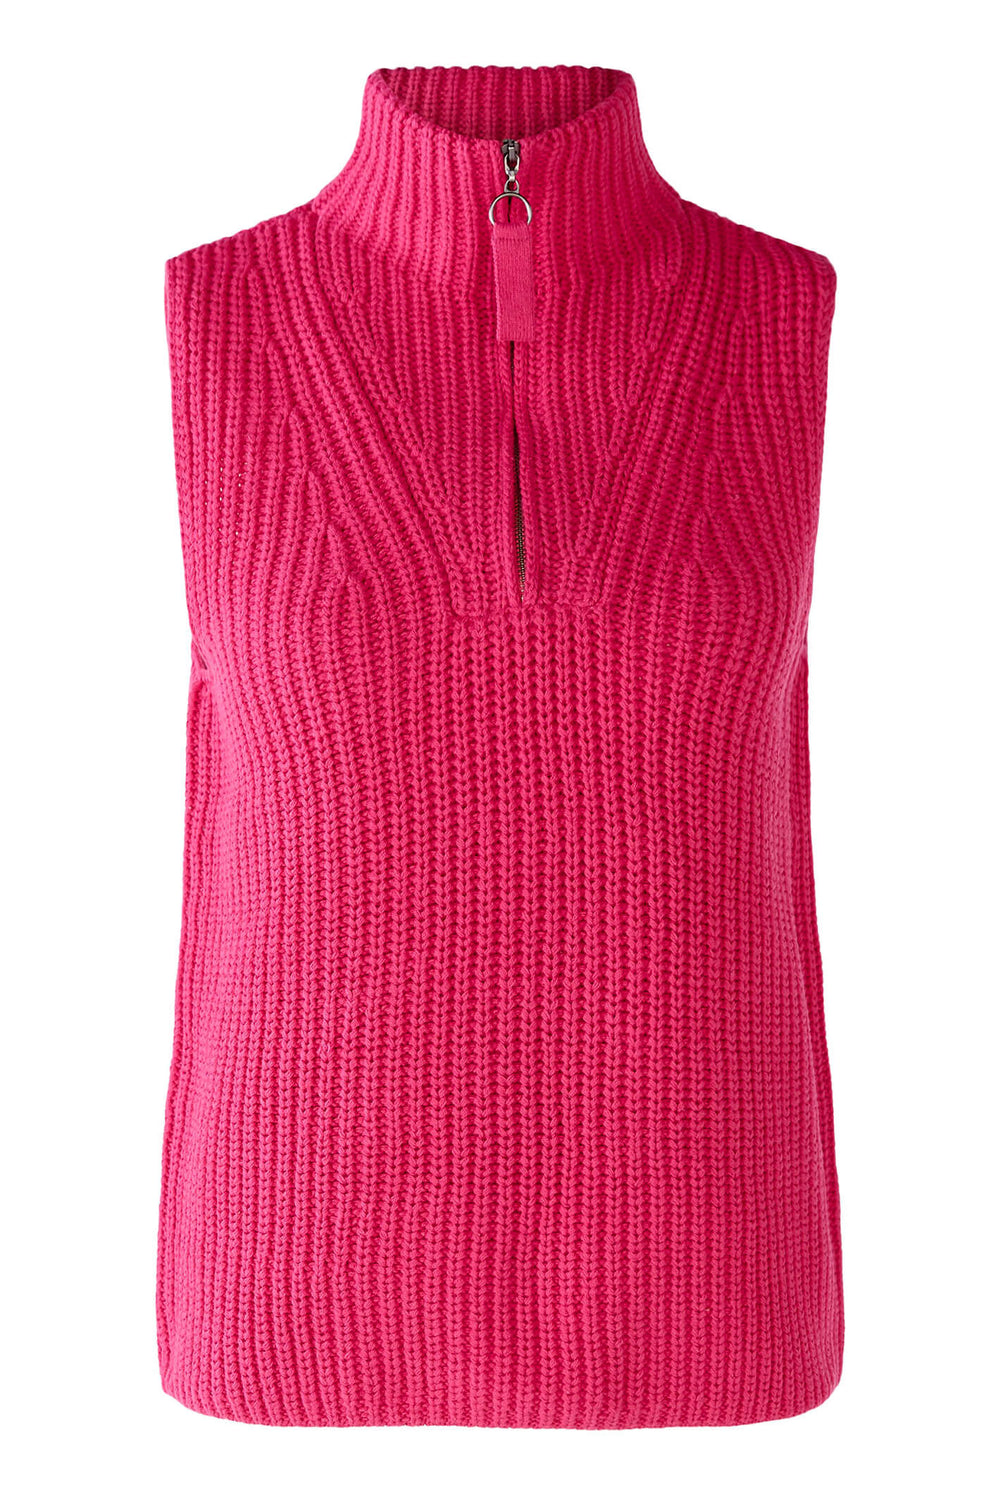 Oui 80131 3394 Pink High Neck Chunky Knit Slipover Jumper - Shirley Allum Boutique